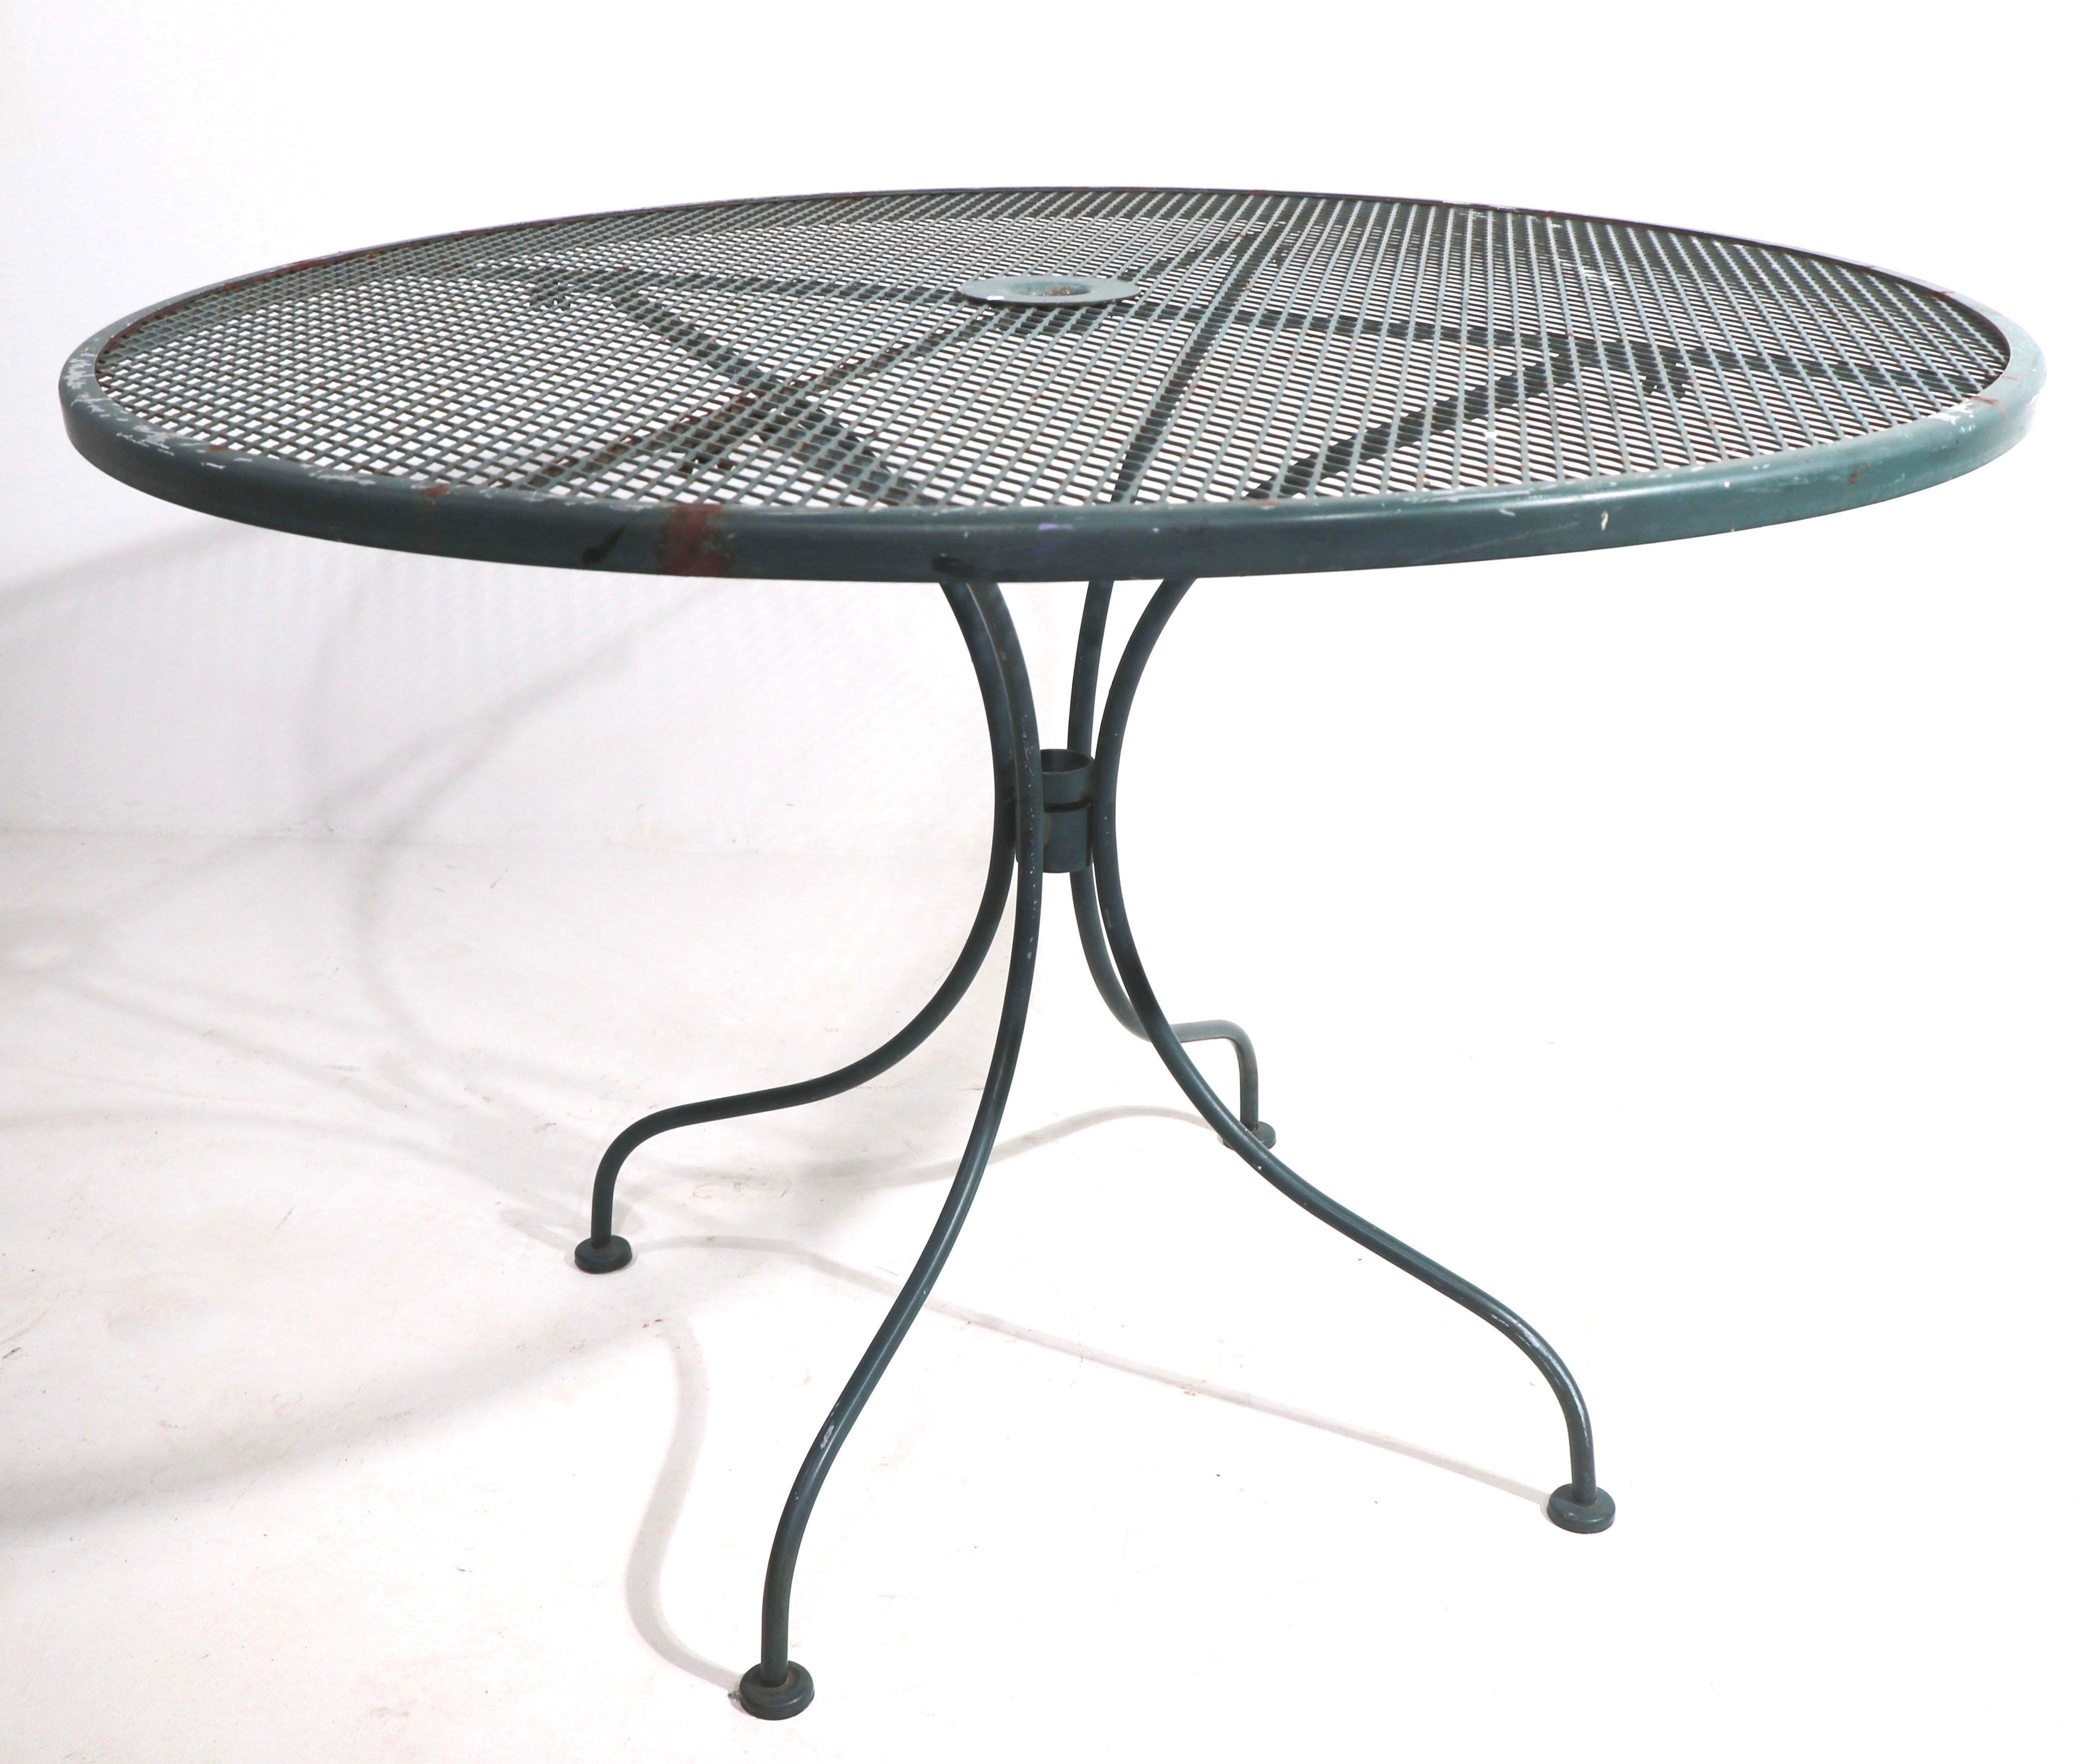 Stylish metal dining table suitable for garden, patio and or poolside use. The table is in very good original condition, free of structural damage or repairs, showing only light cosmetic wear, normal and consistent with age.